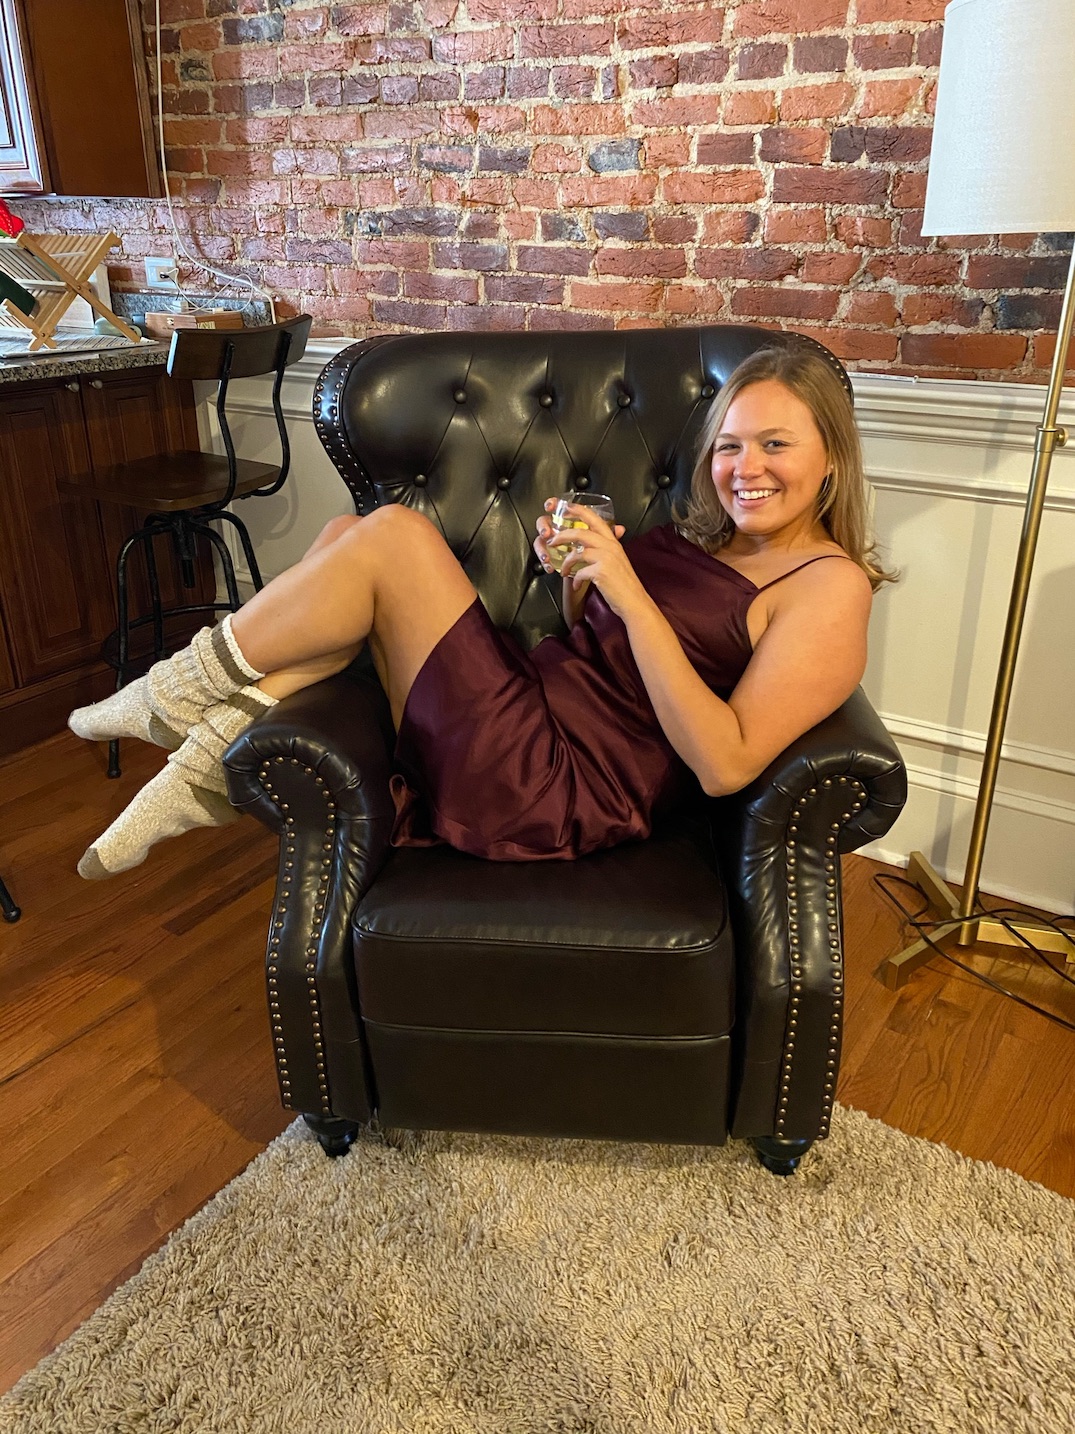 Girl sitting on chair with glass of wine